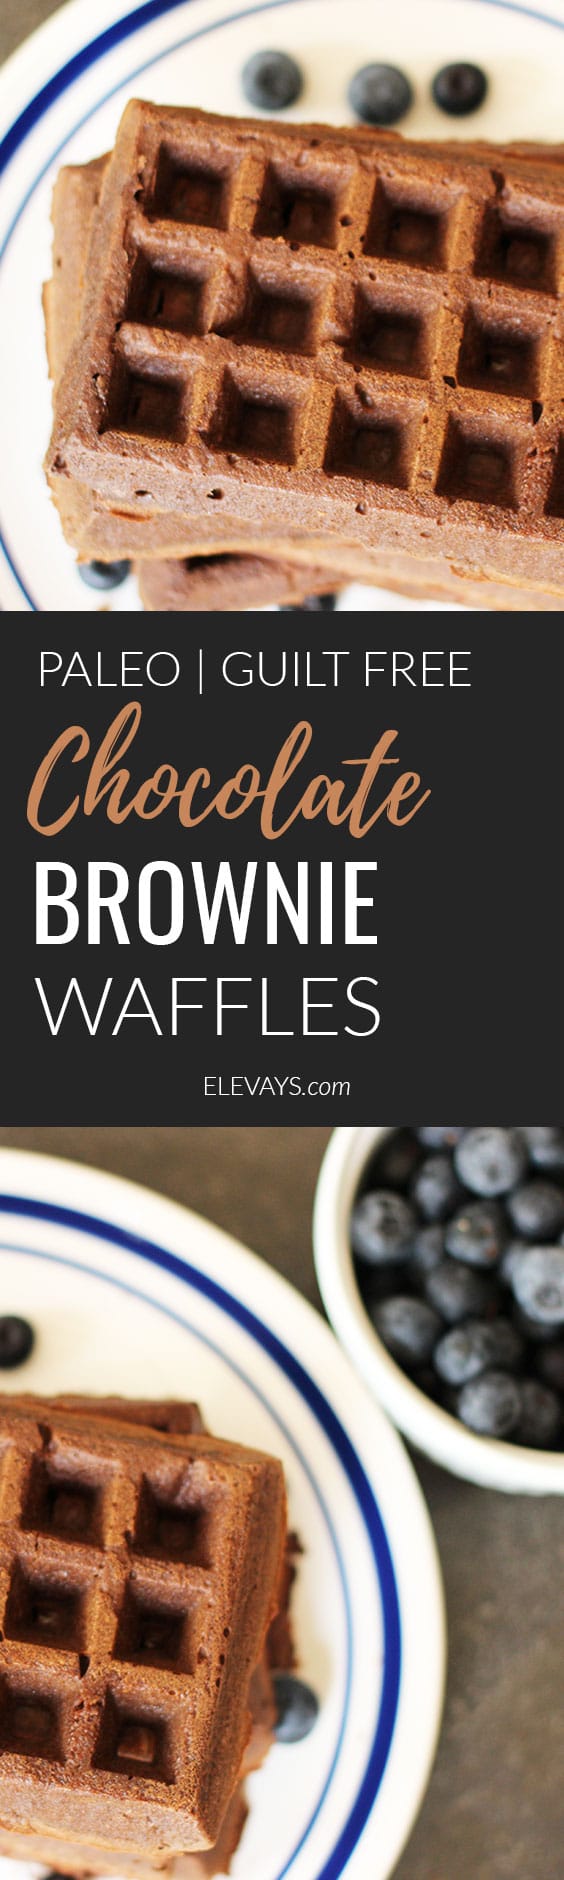 Paleo and guilt free, these chocolate brownie waffles are a breakfast treat! #chocolate #paleo #brownie #waffles